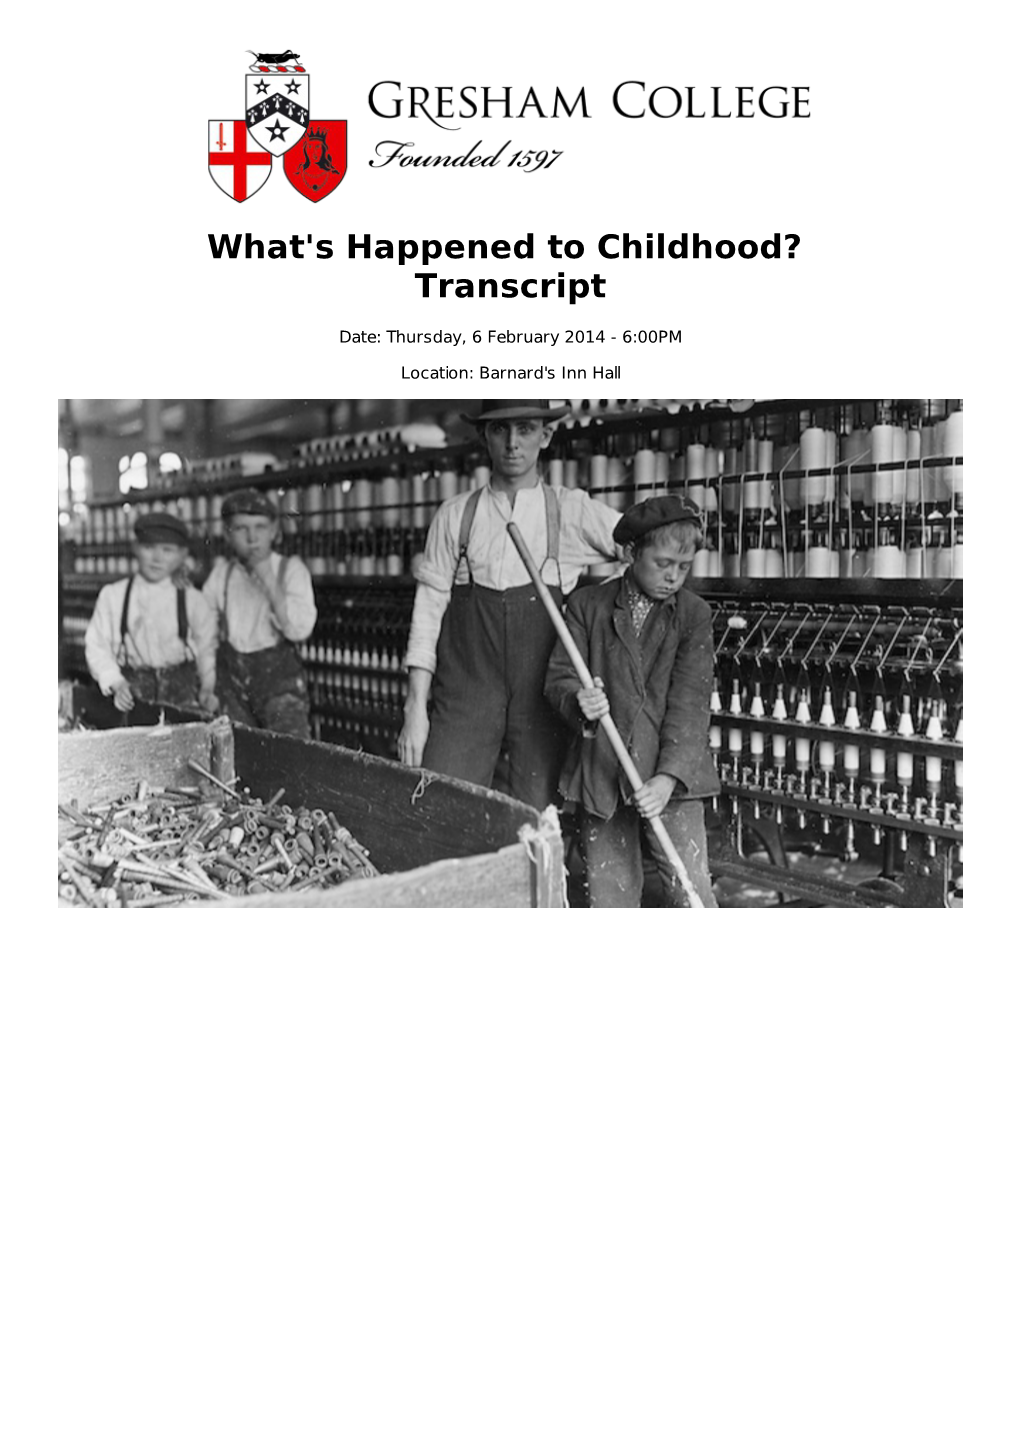 What's Happened to Childhood? Transcript